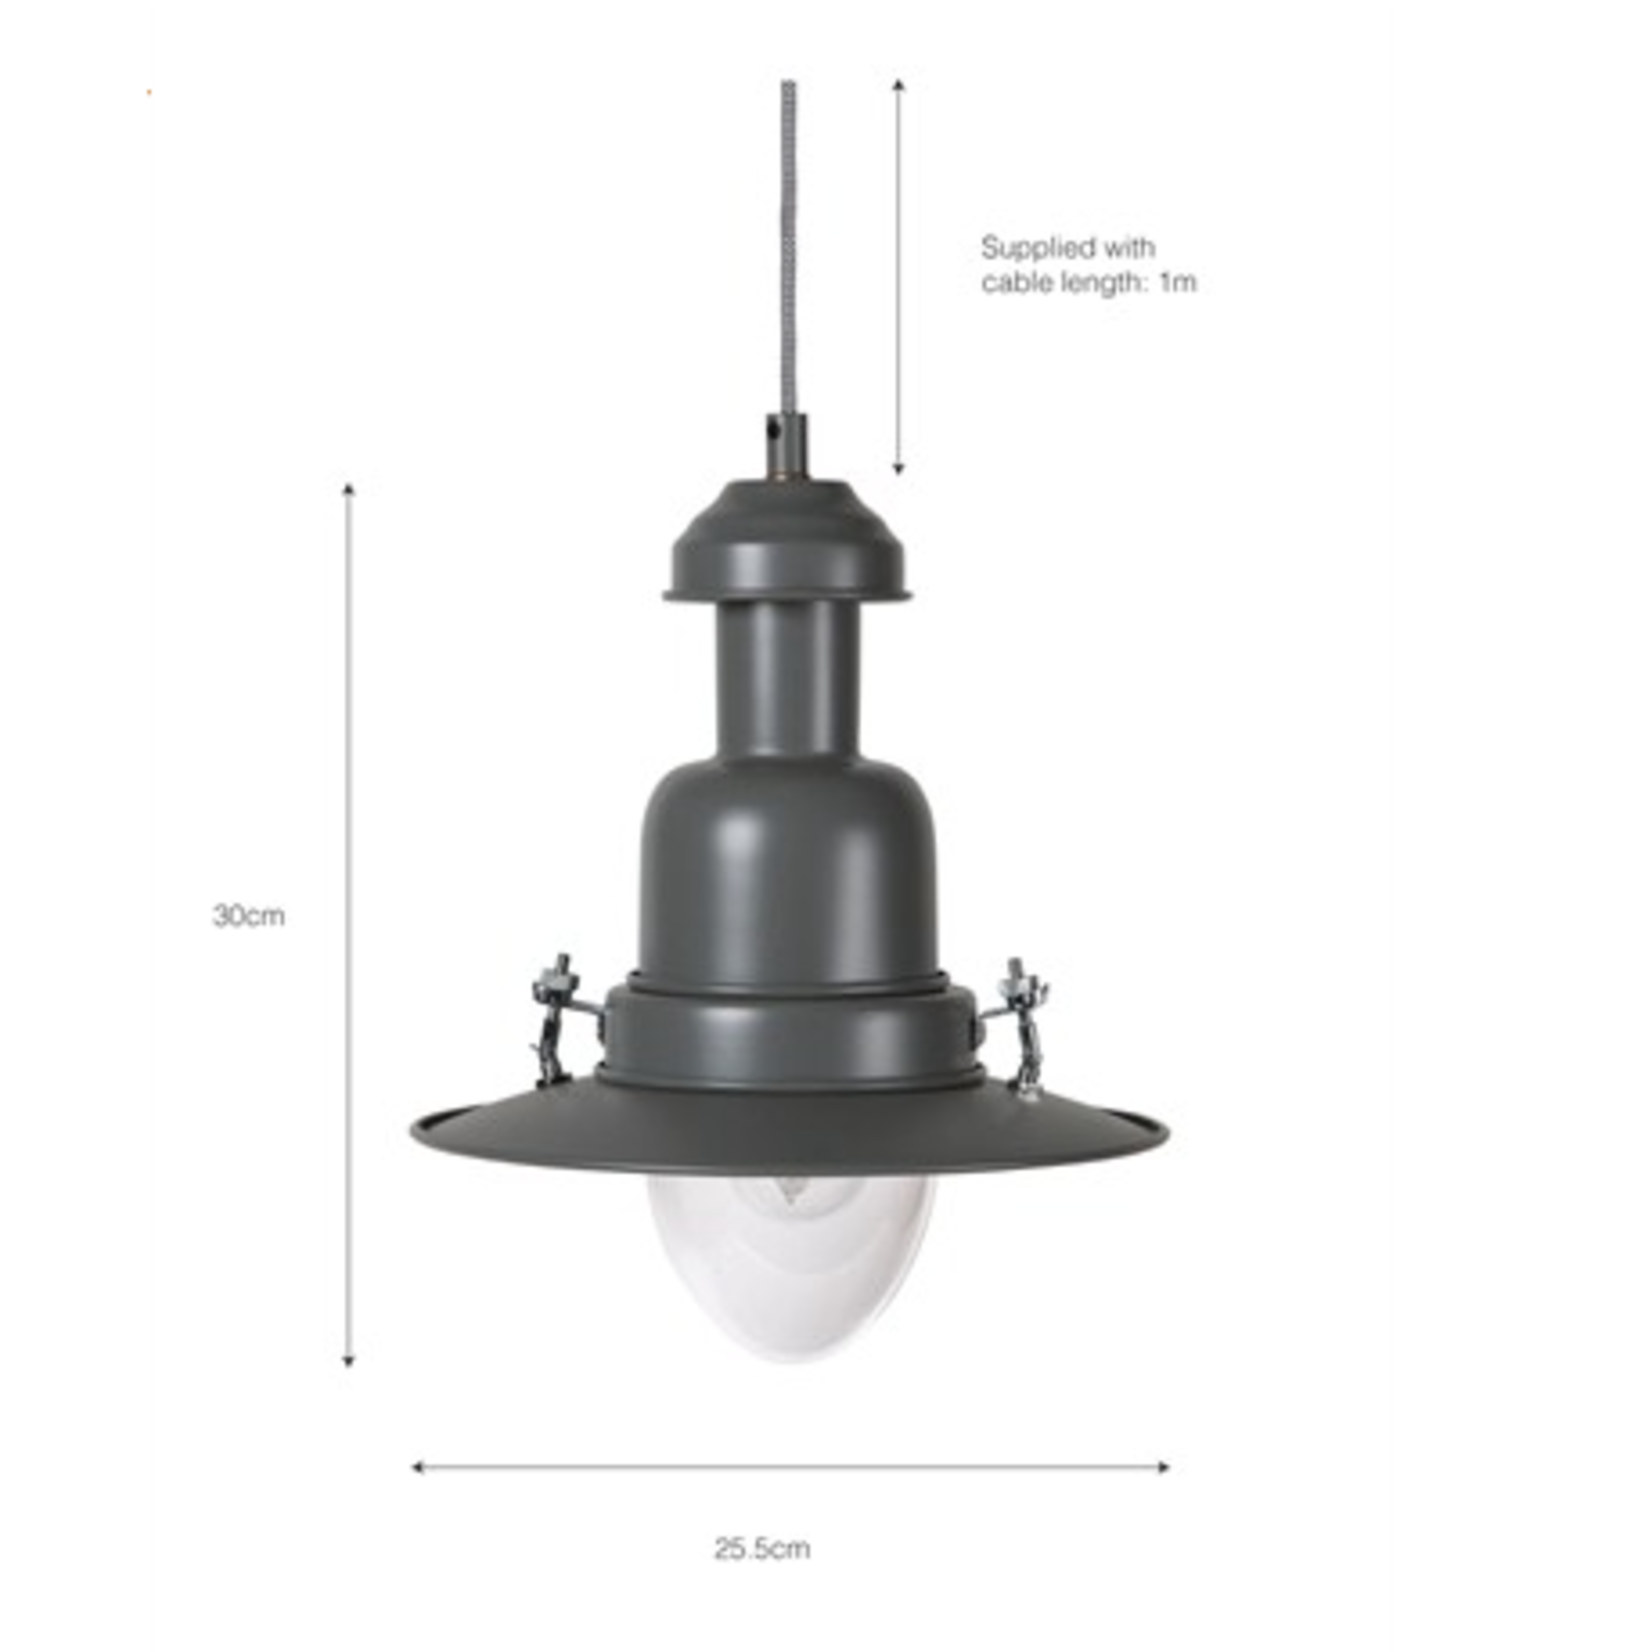 GT DISCOUNTED Pendant Fishing Light - Charcoal - small dent WAS £65